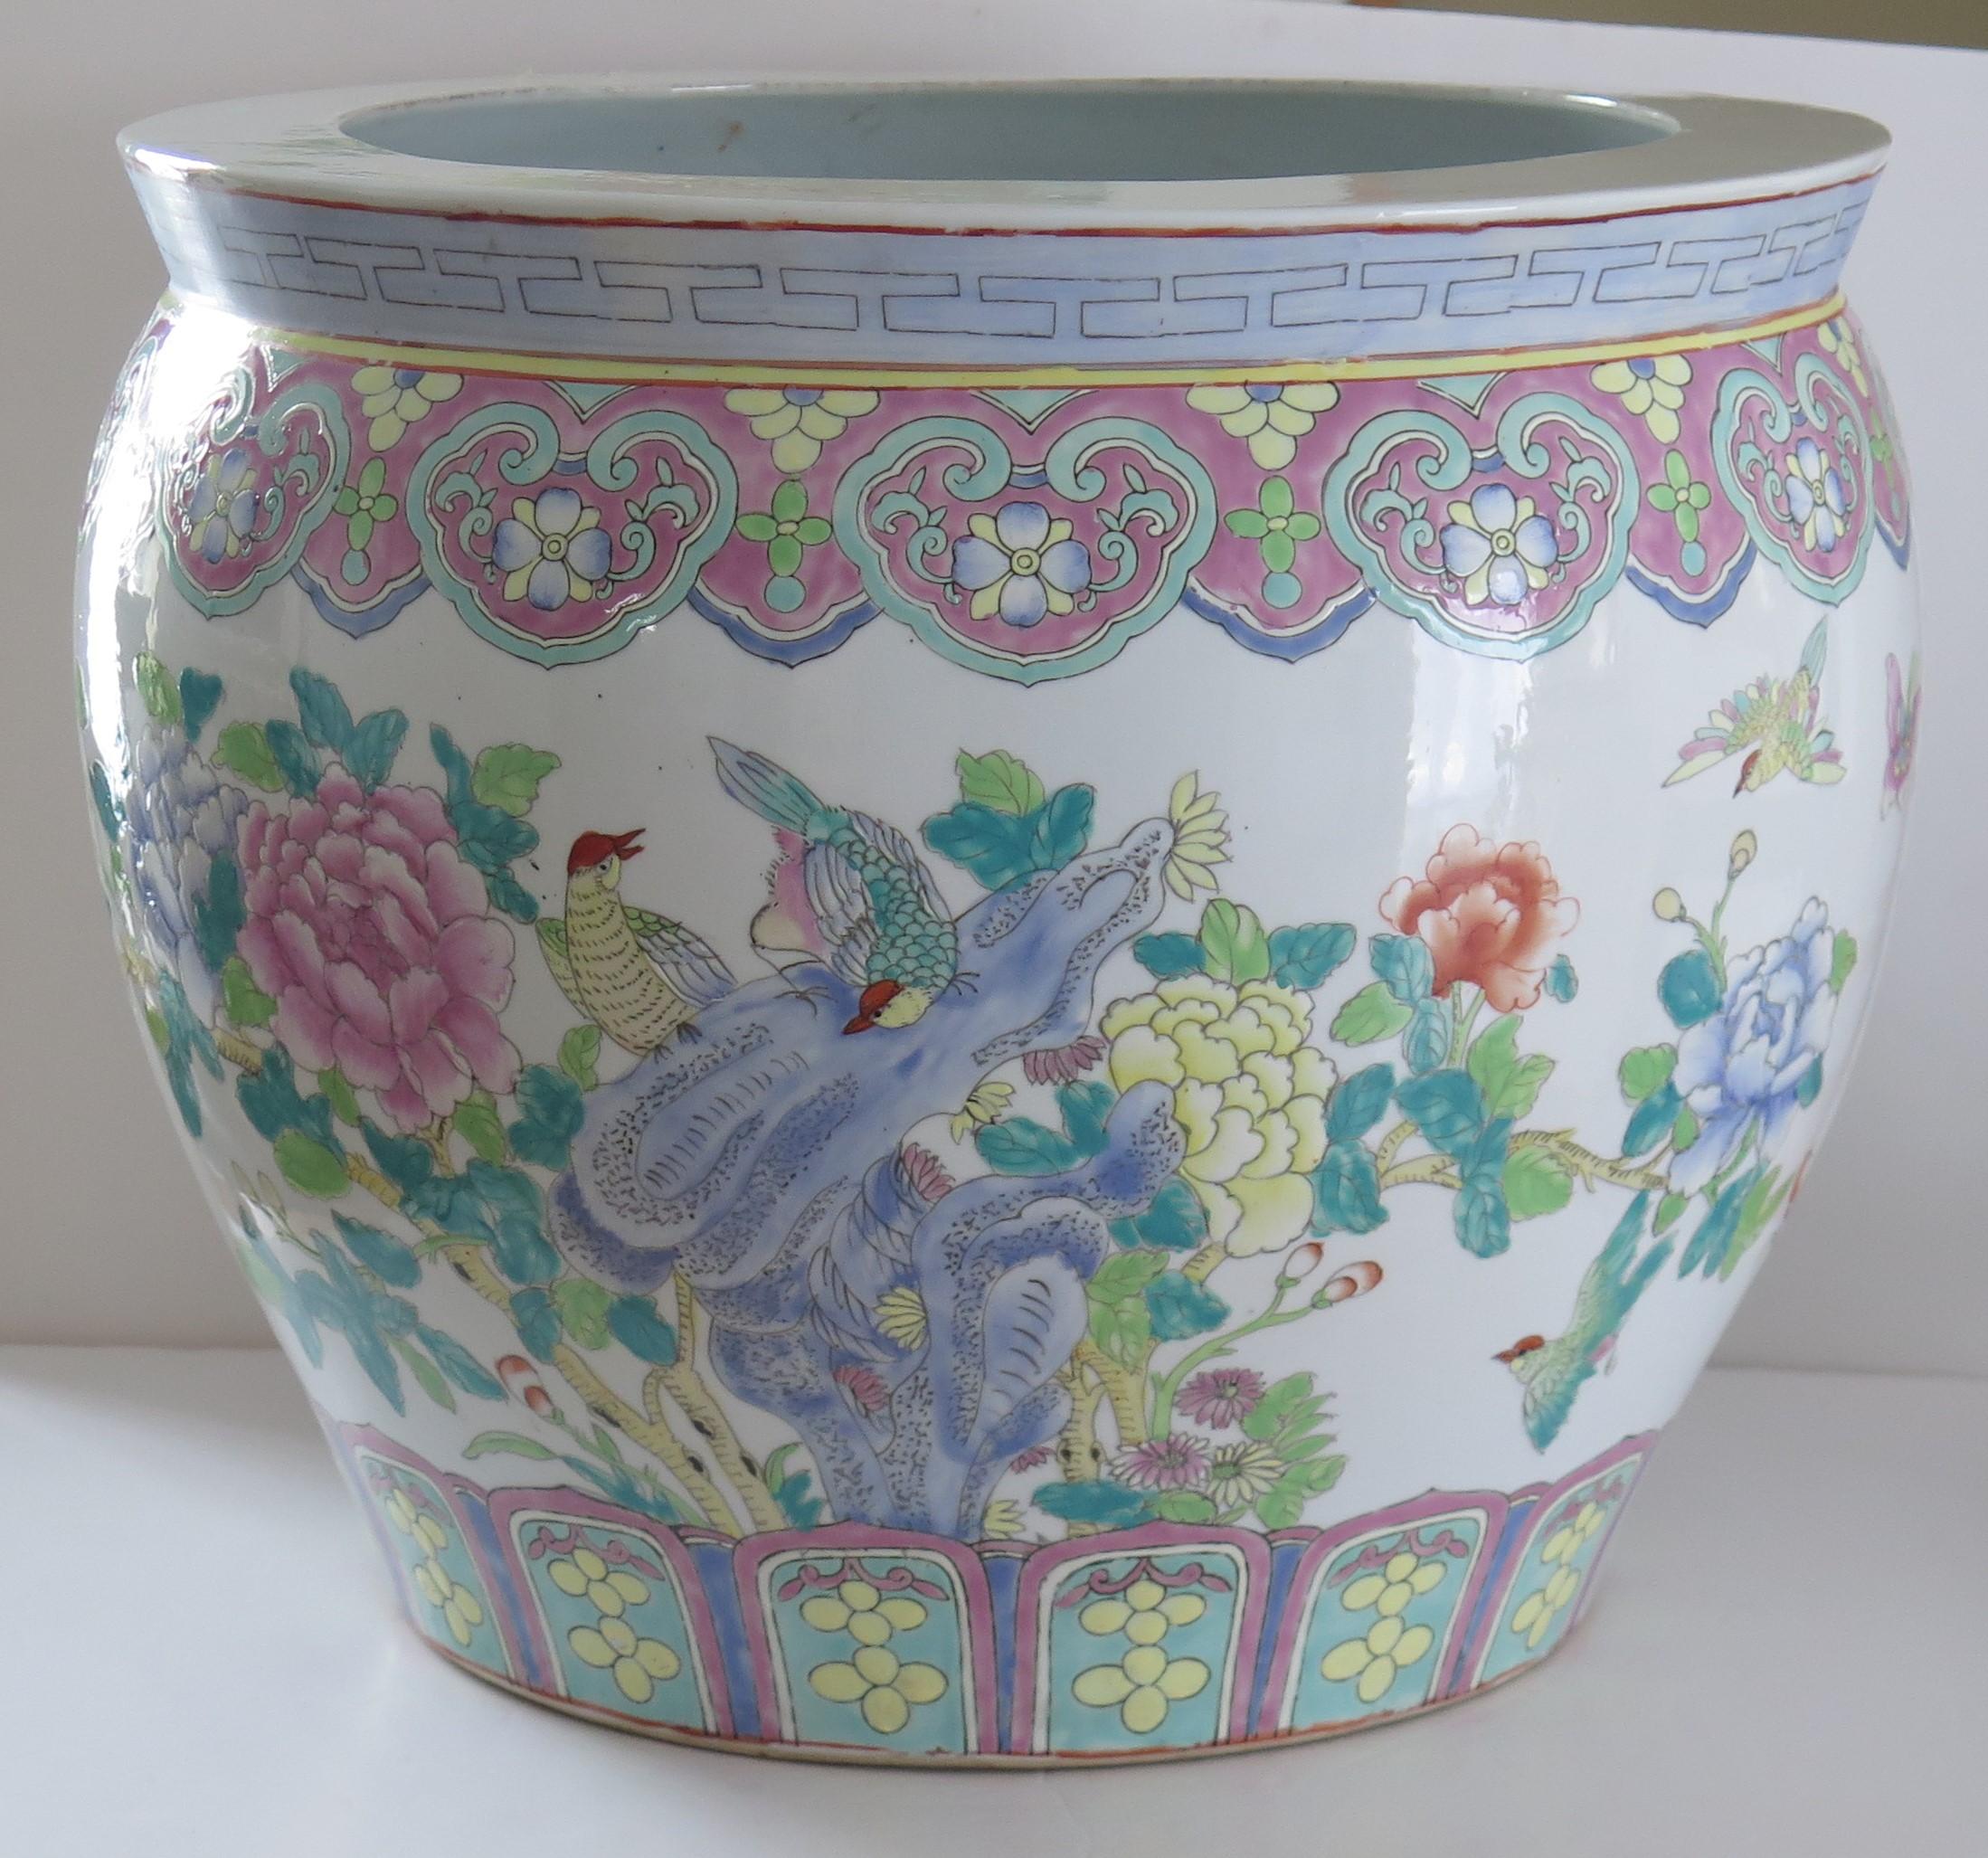 This is a good, large, Chinese Export porcelain Jardiniere (Cachepot) or Fish Bowl, hand decorated in a Famille-Rose pattern and dating to the mid-20th century.

This piece is well potted with a good shape and wide diameter.

It is hand